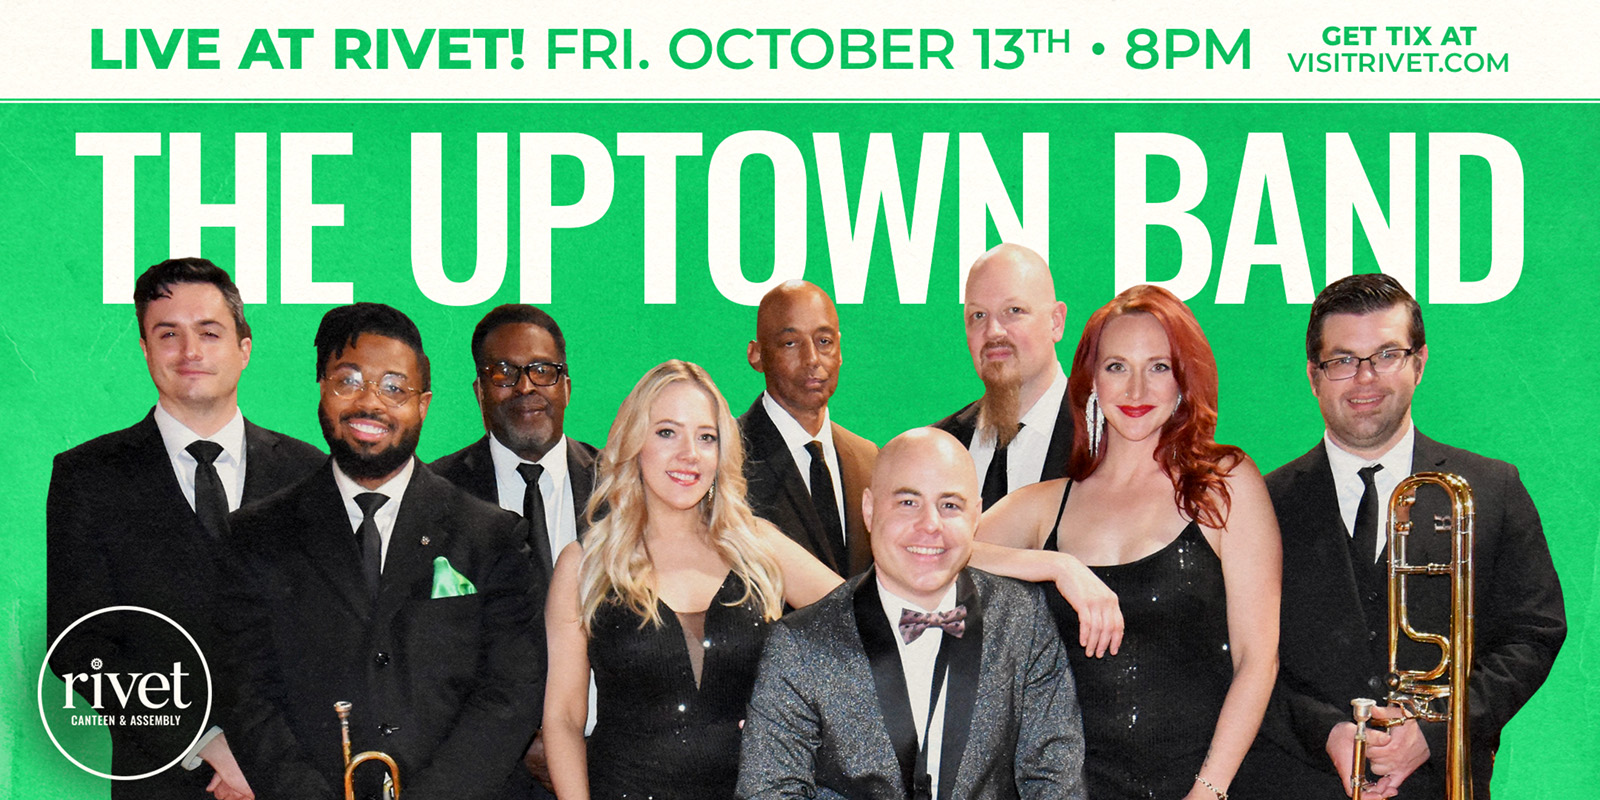 The Uptown Band playing live at Rivet: Canteen & Assembly on Friday, October 13th, 2023. Be there!